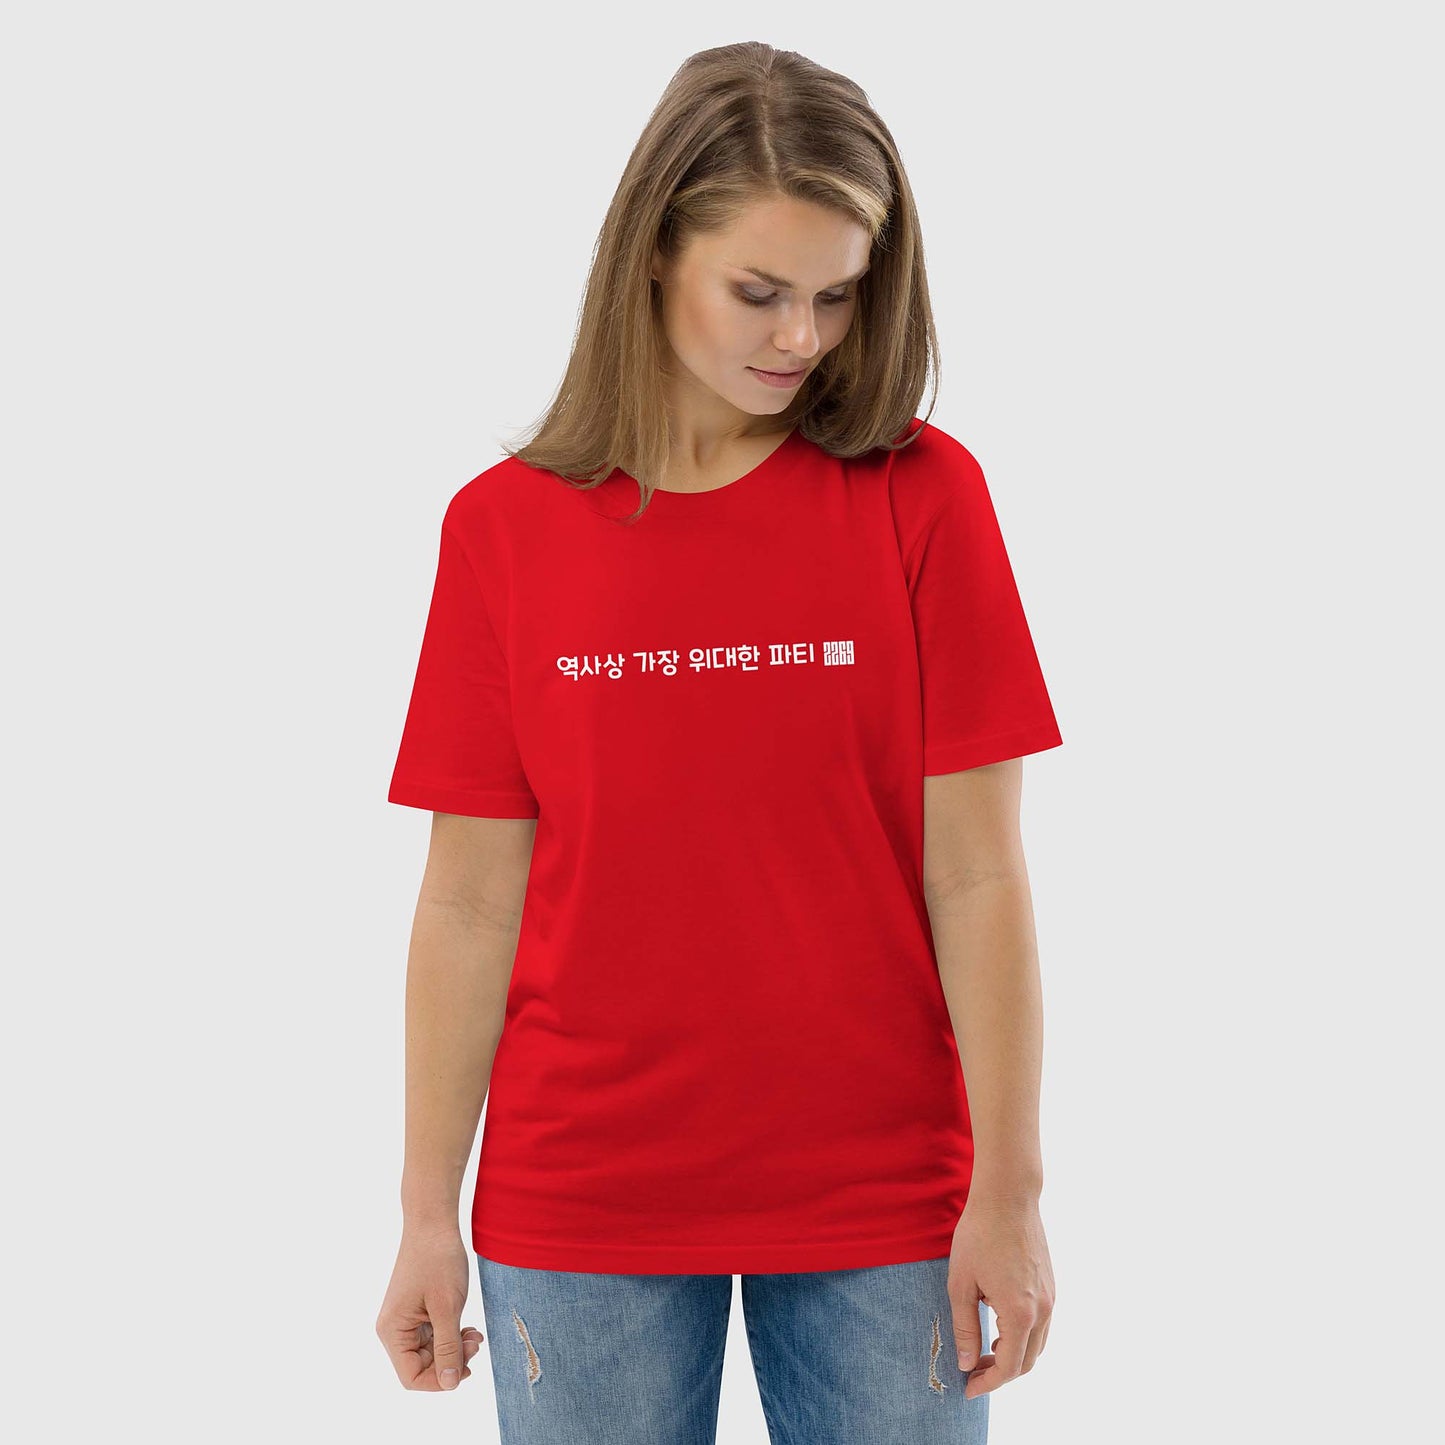 Unisex red organic cotton t-shirt with Korean 2269 party message